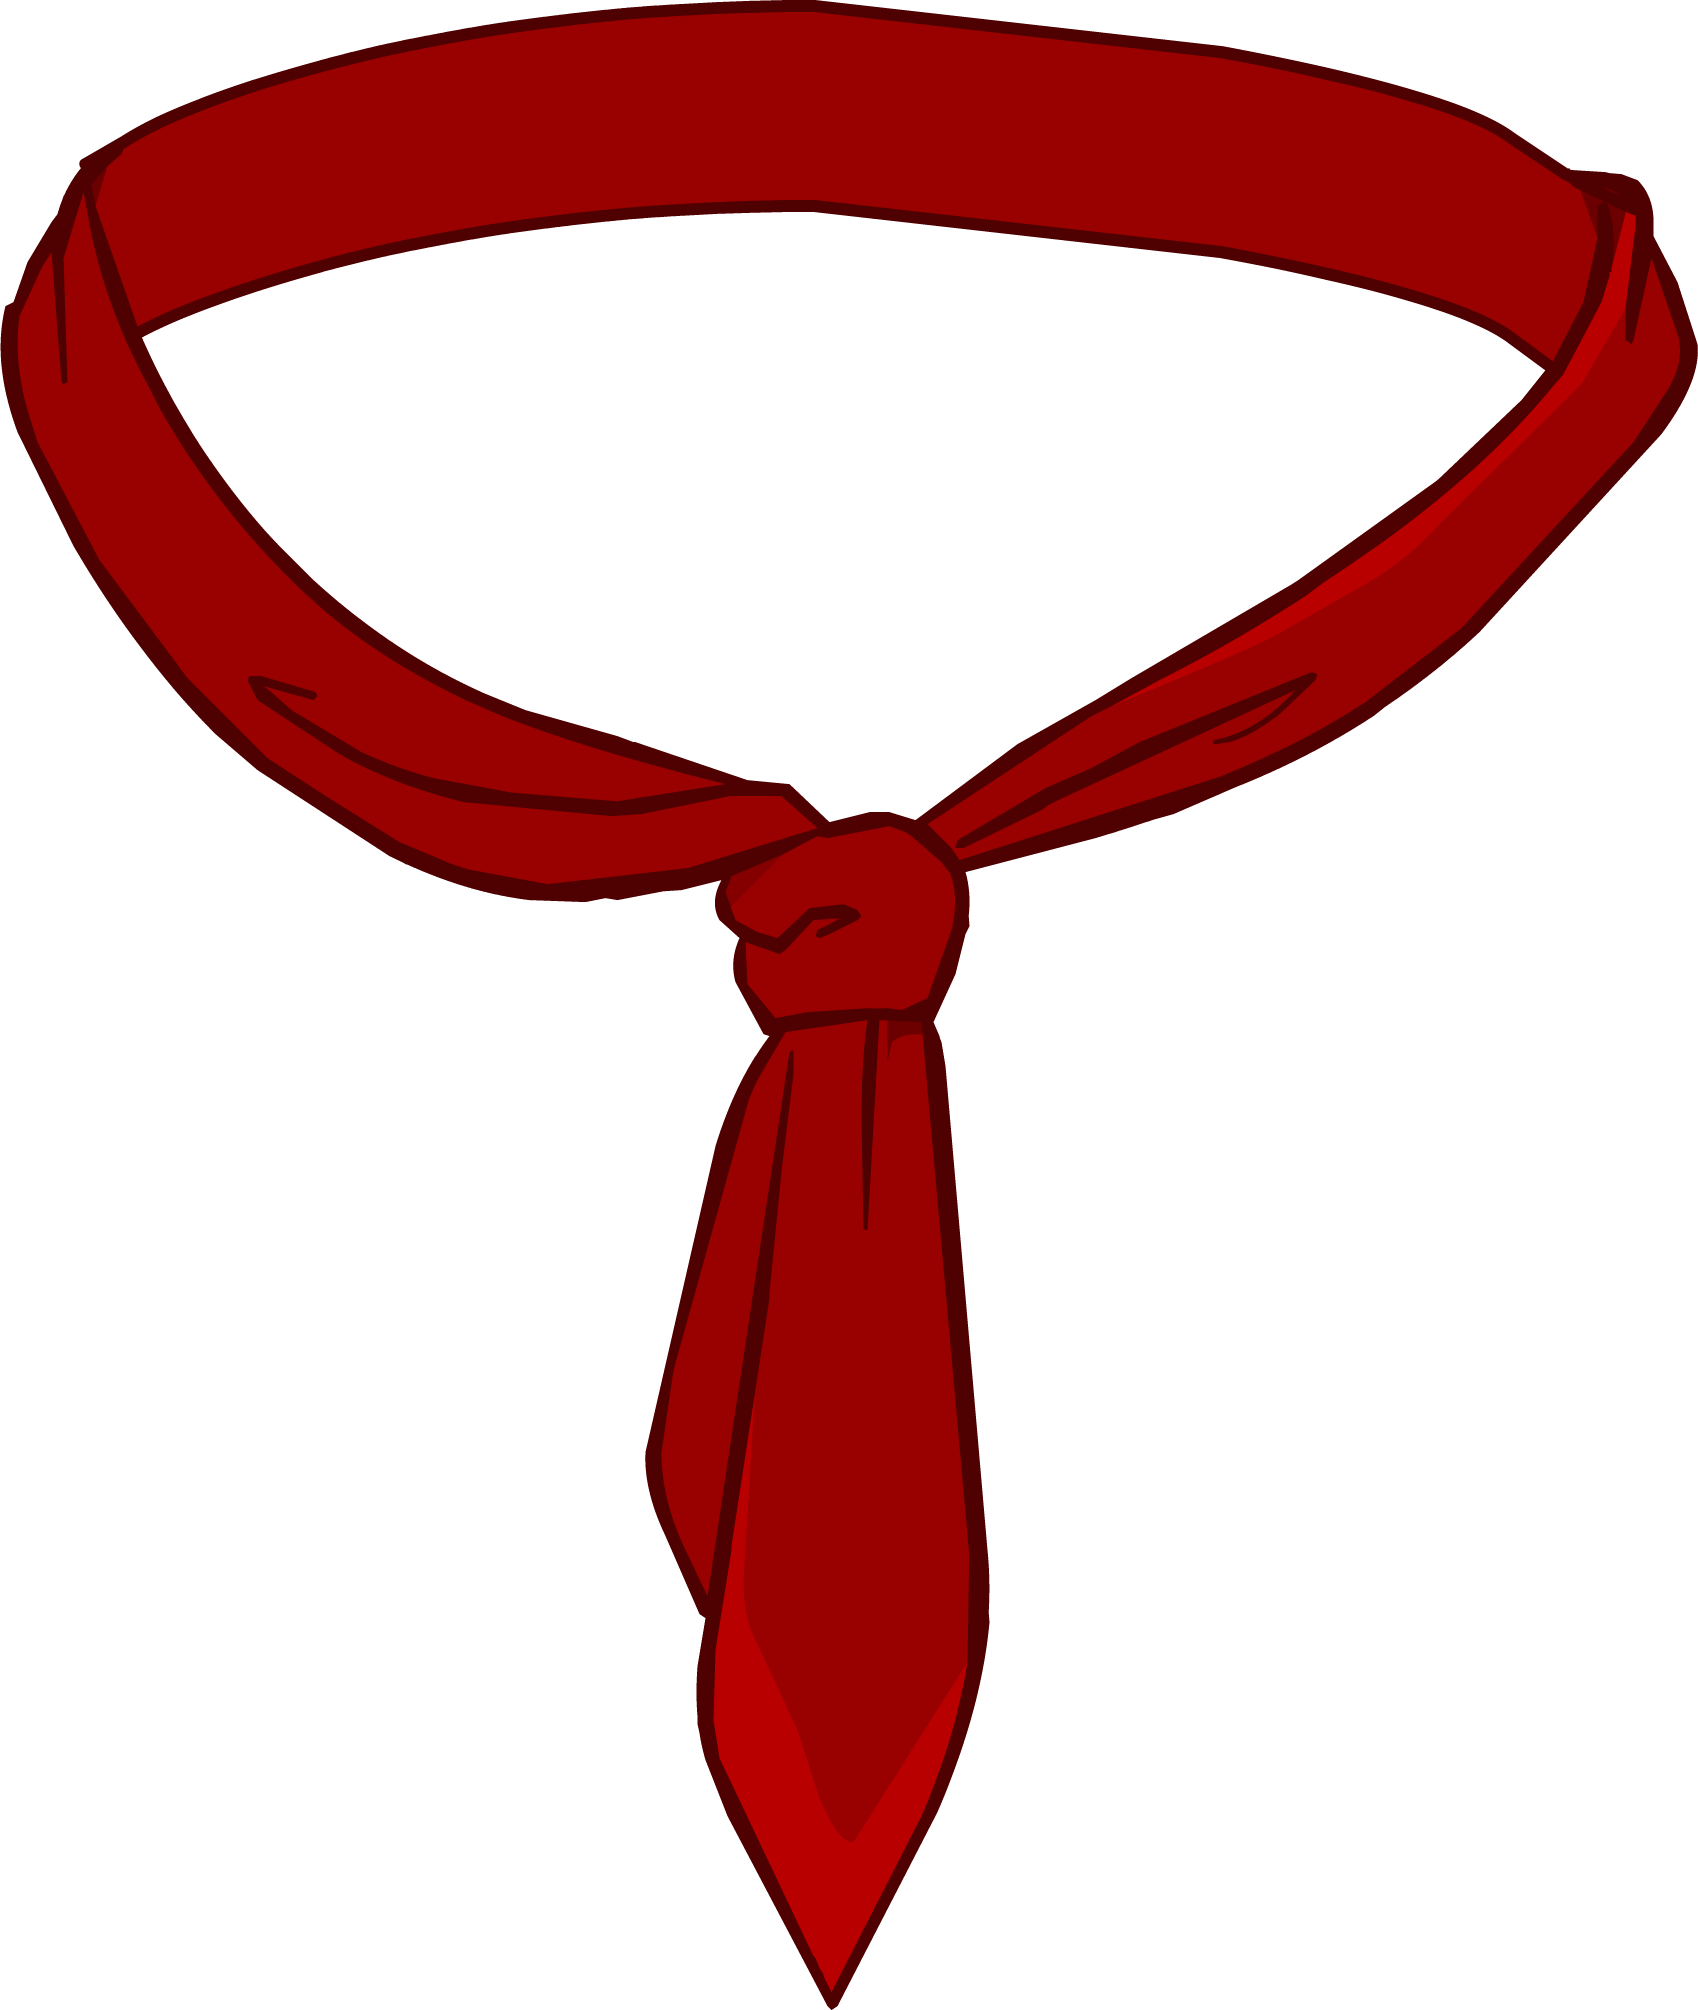 Red tie png images